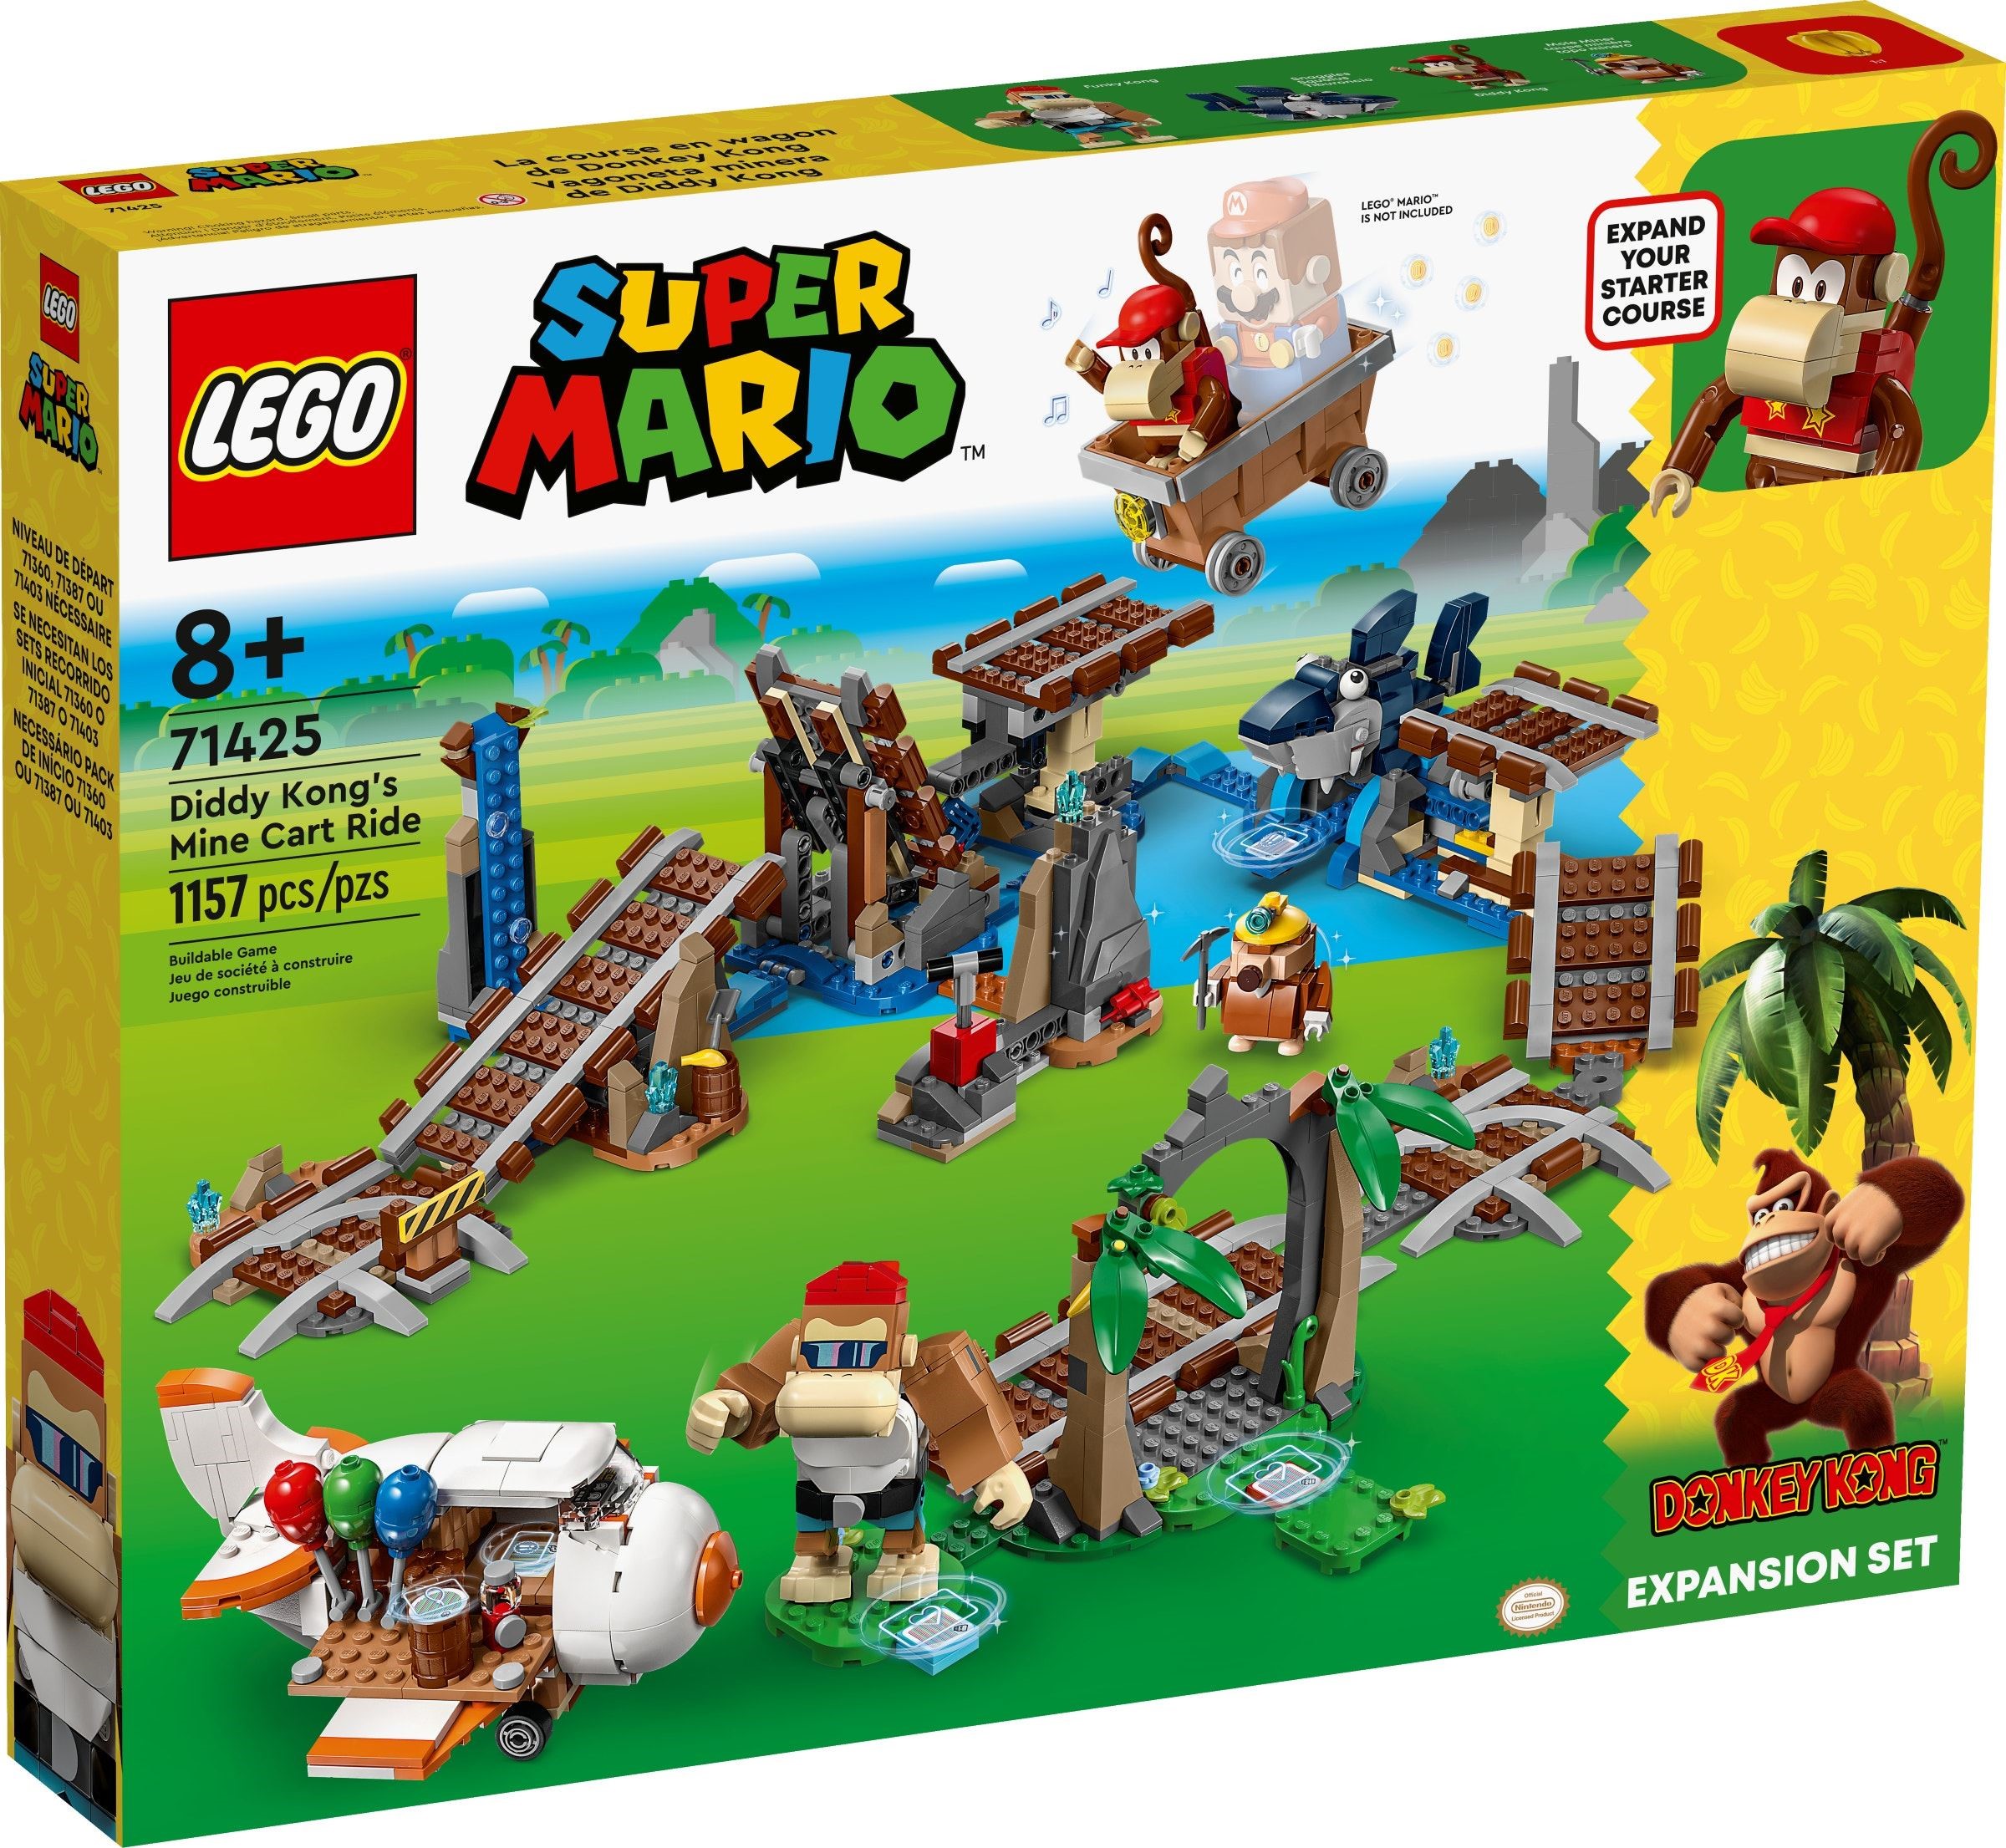 {LEGO Super Mario Donkey Kong Sets Officially Announced - The Brick Fan}